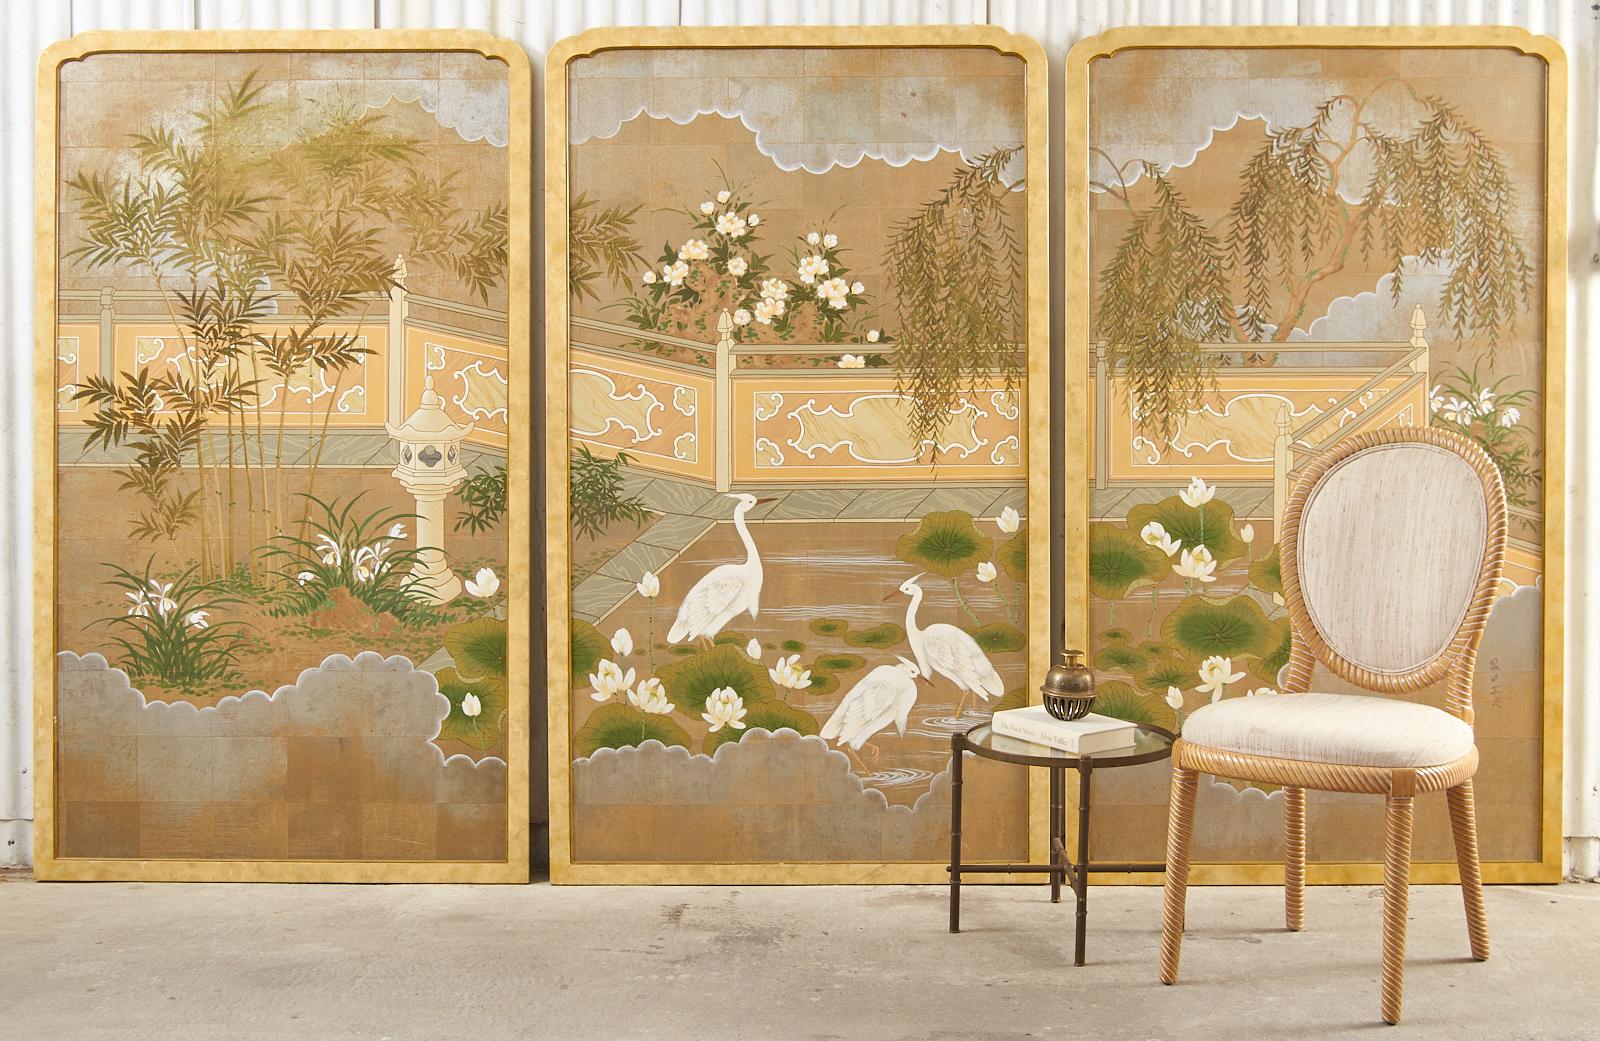 Fantastic set of three framed chinoiserie decorated landscape panels painted by Robert Crowder (1911-2010 American). The paintings feature a flora and fauna garden centered by white egrets in a pond with lotus blossom. The scene is painted over a